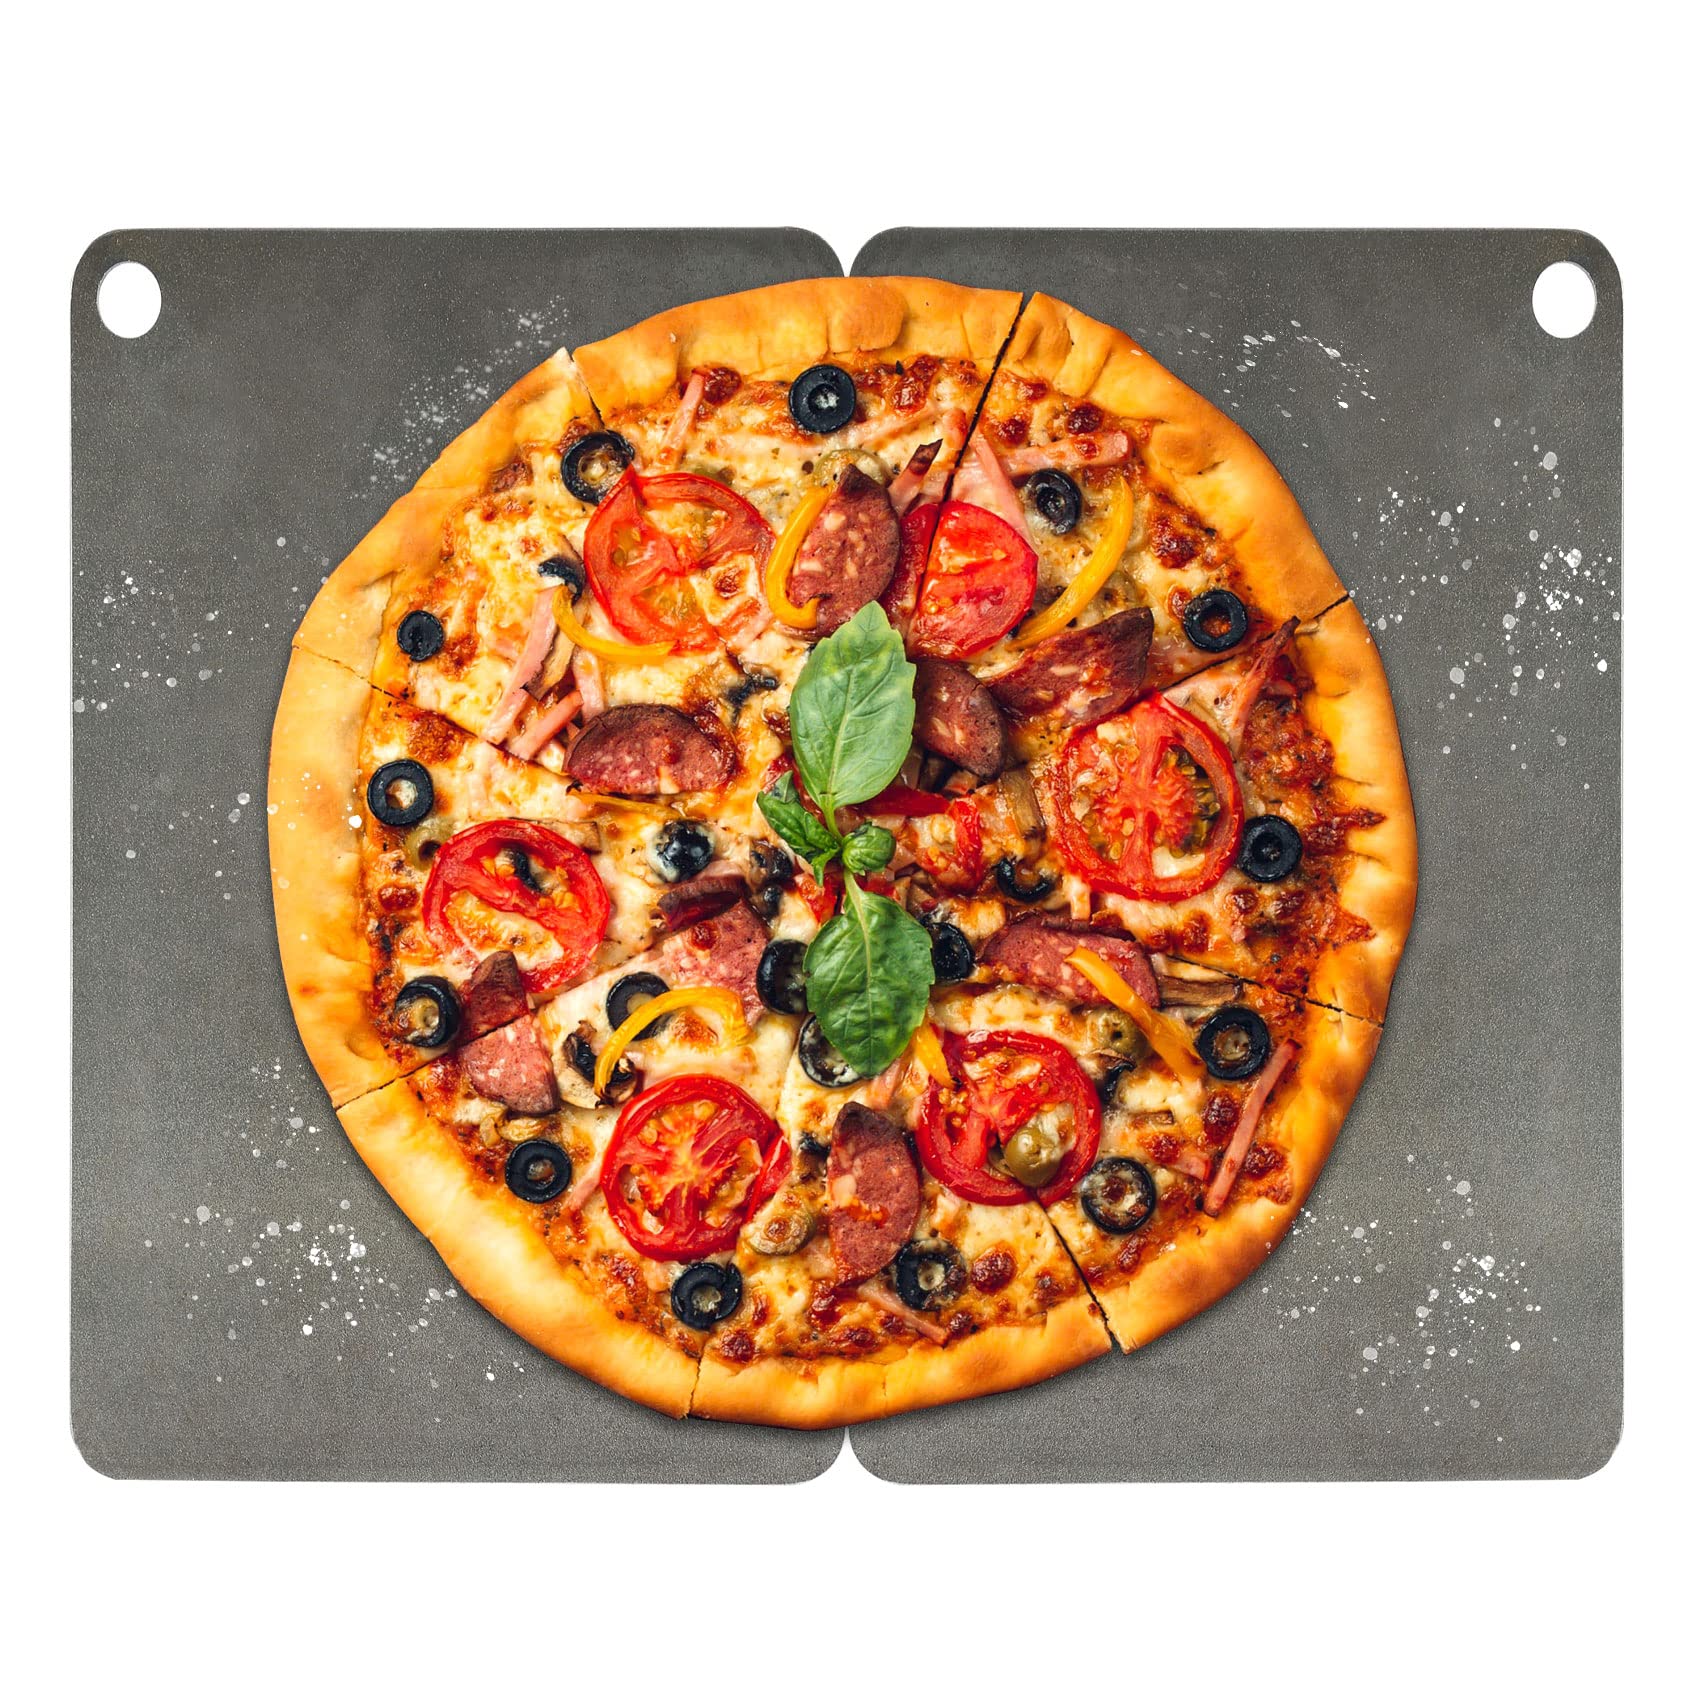 TCFUNDY Pizza Steel for Oven 2PCS, Steel Pizza Stone for Grill and Oven, Pre-Seasoned Solid Carbon Steel Non-Stick Pizza Pans, Combine into 13.5